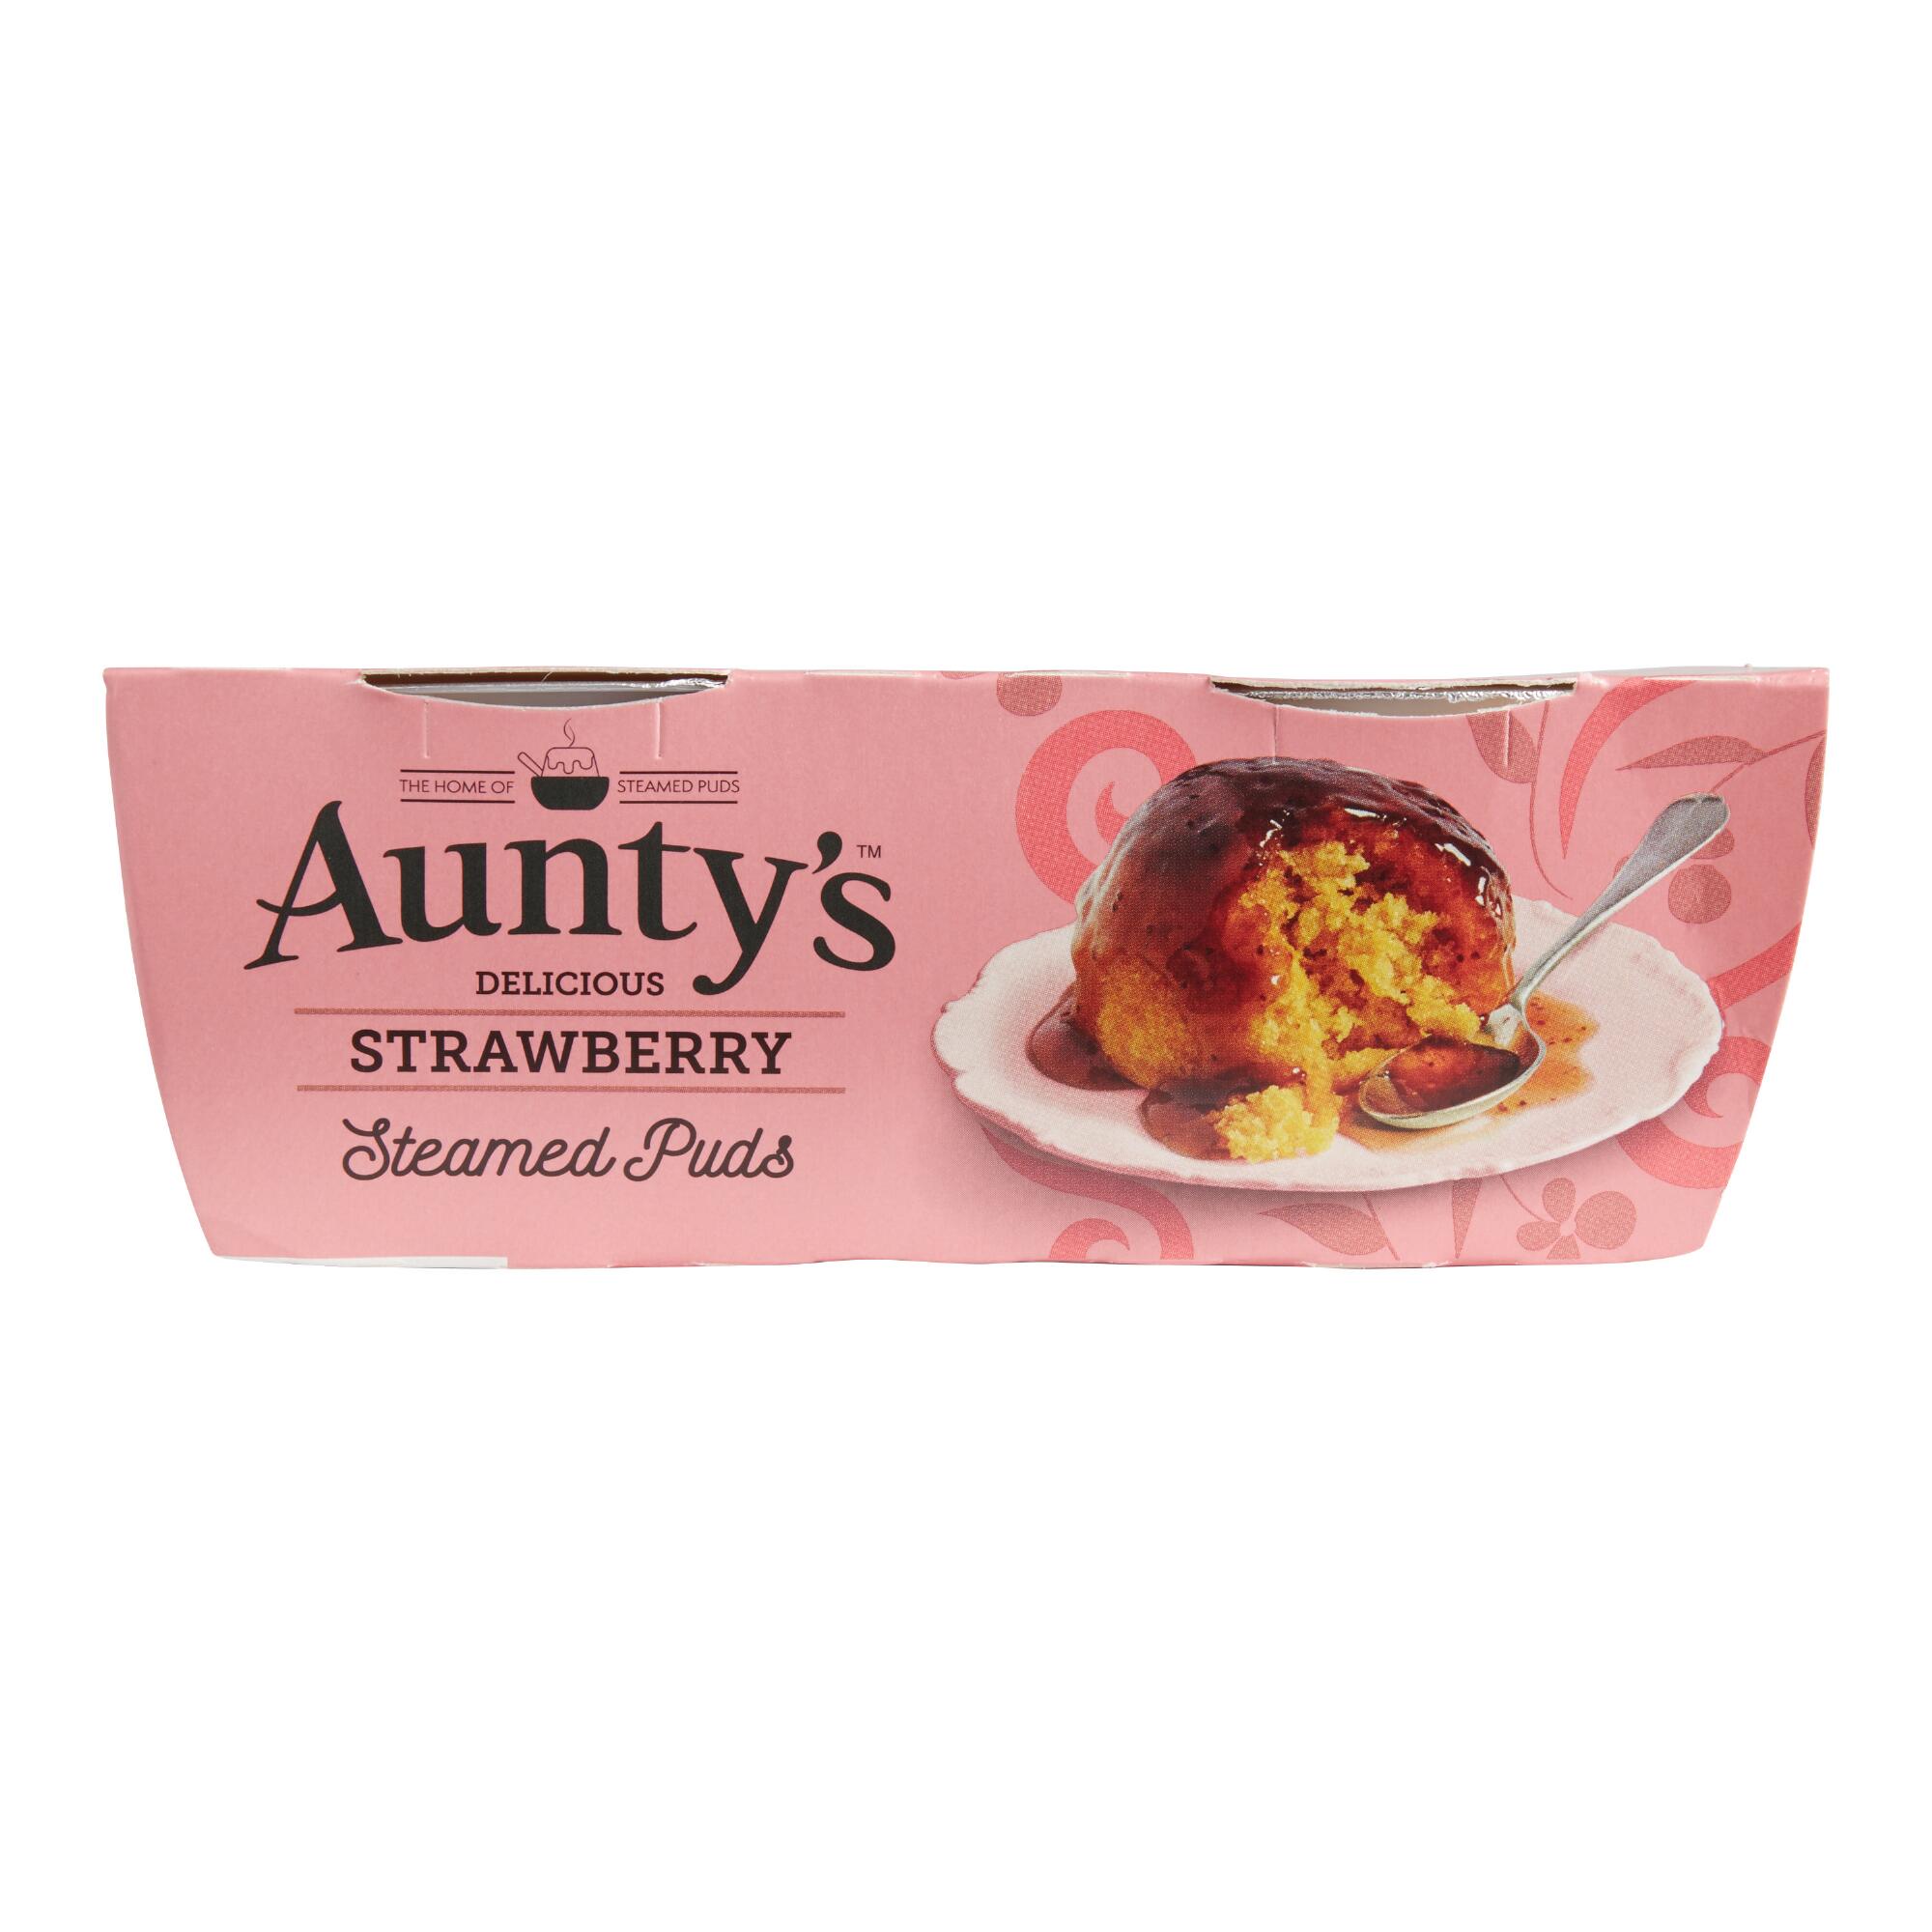 Aunty's Strawberry Steamed Puds Set of 2 by World Market